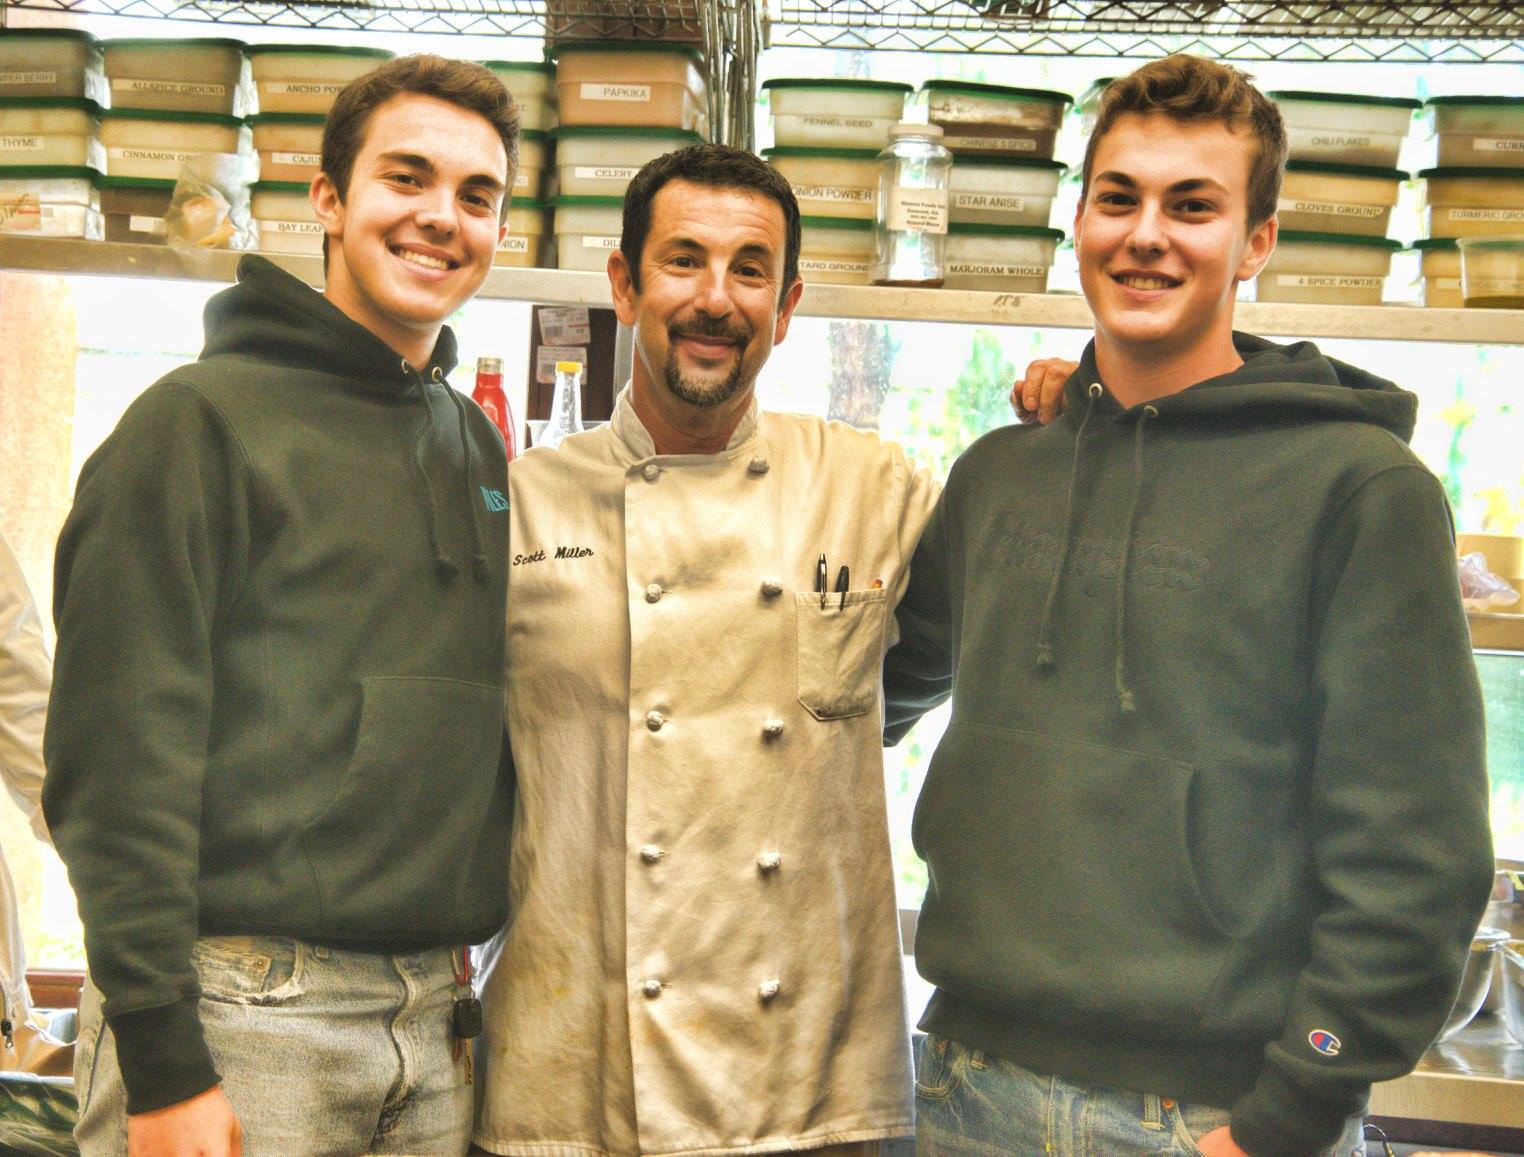 mhf chef scott miller with sons max and josh